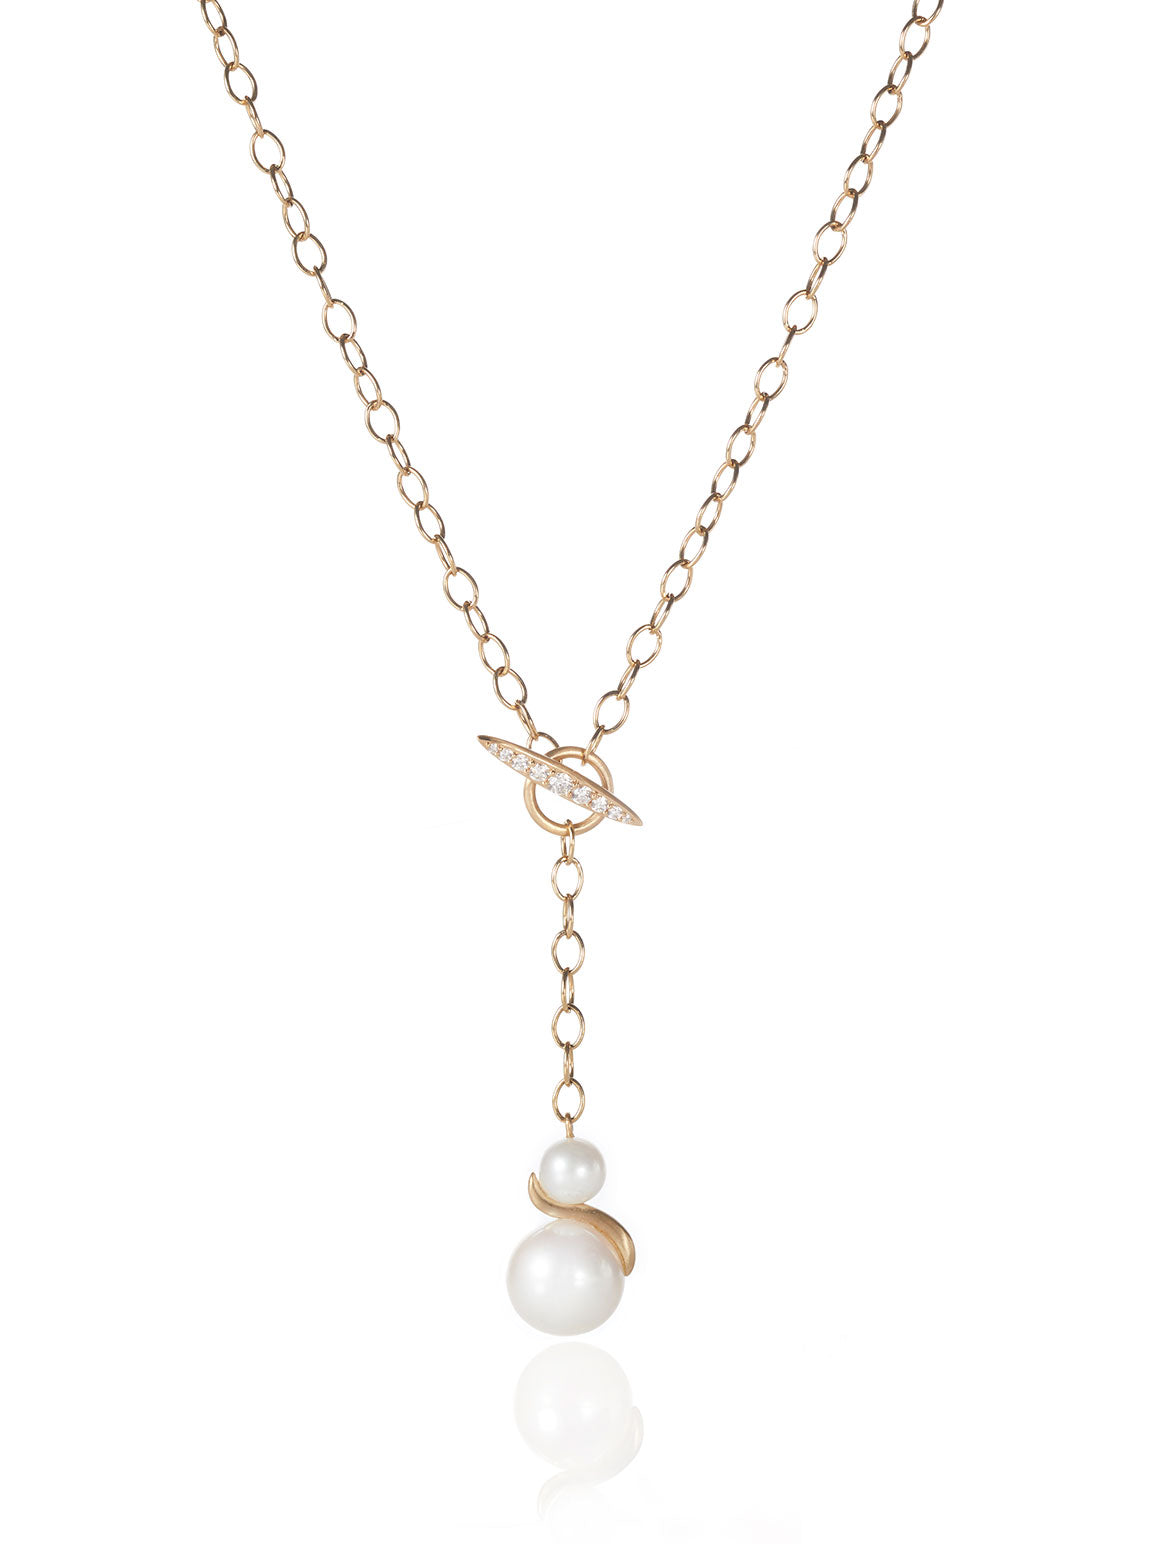 Double Pearl drop on Toggle chain necklace